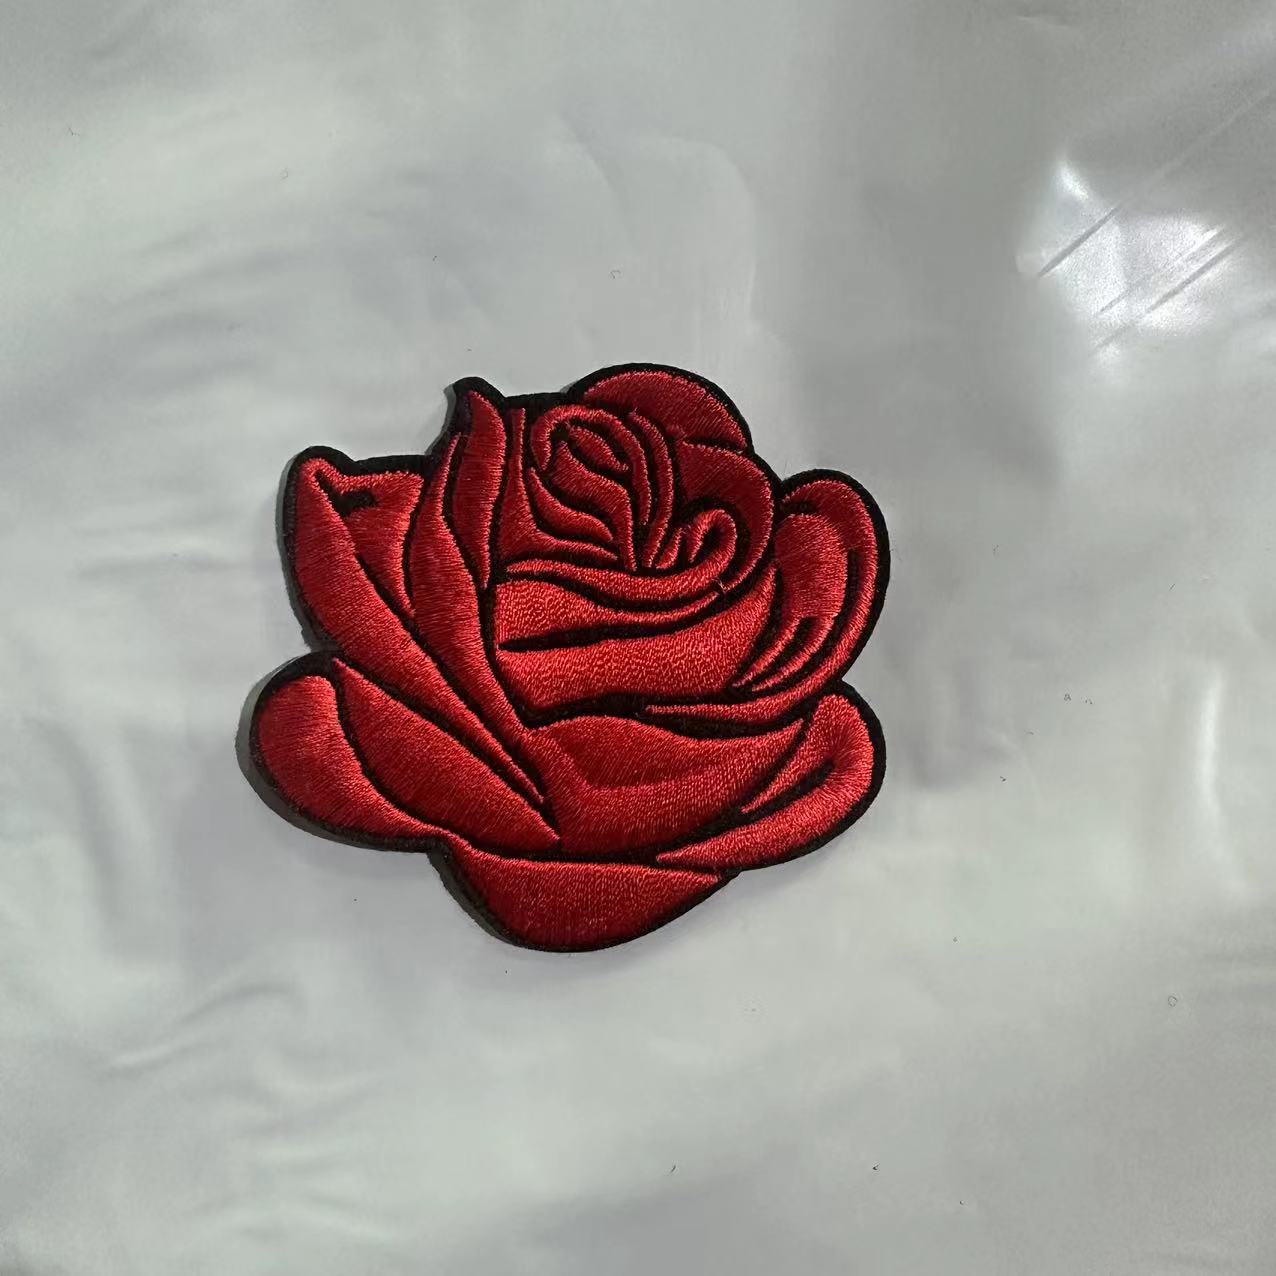 Rose Patch Iron on or Sew on - Flower Patch - Embroidery - Aesthetic Patch